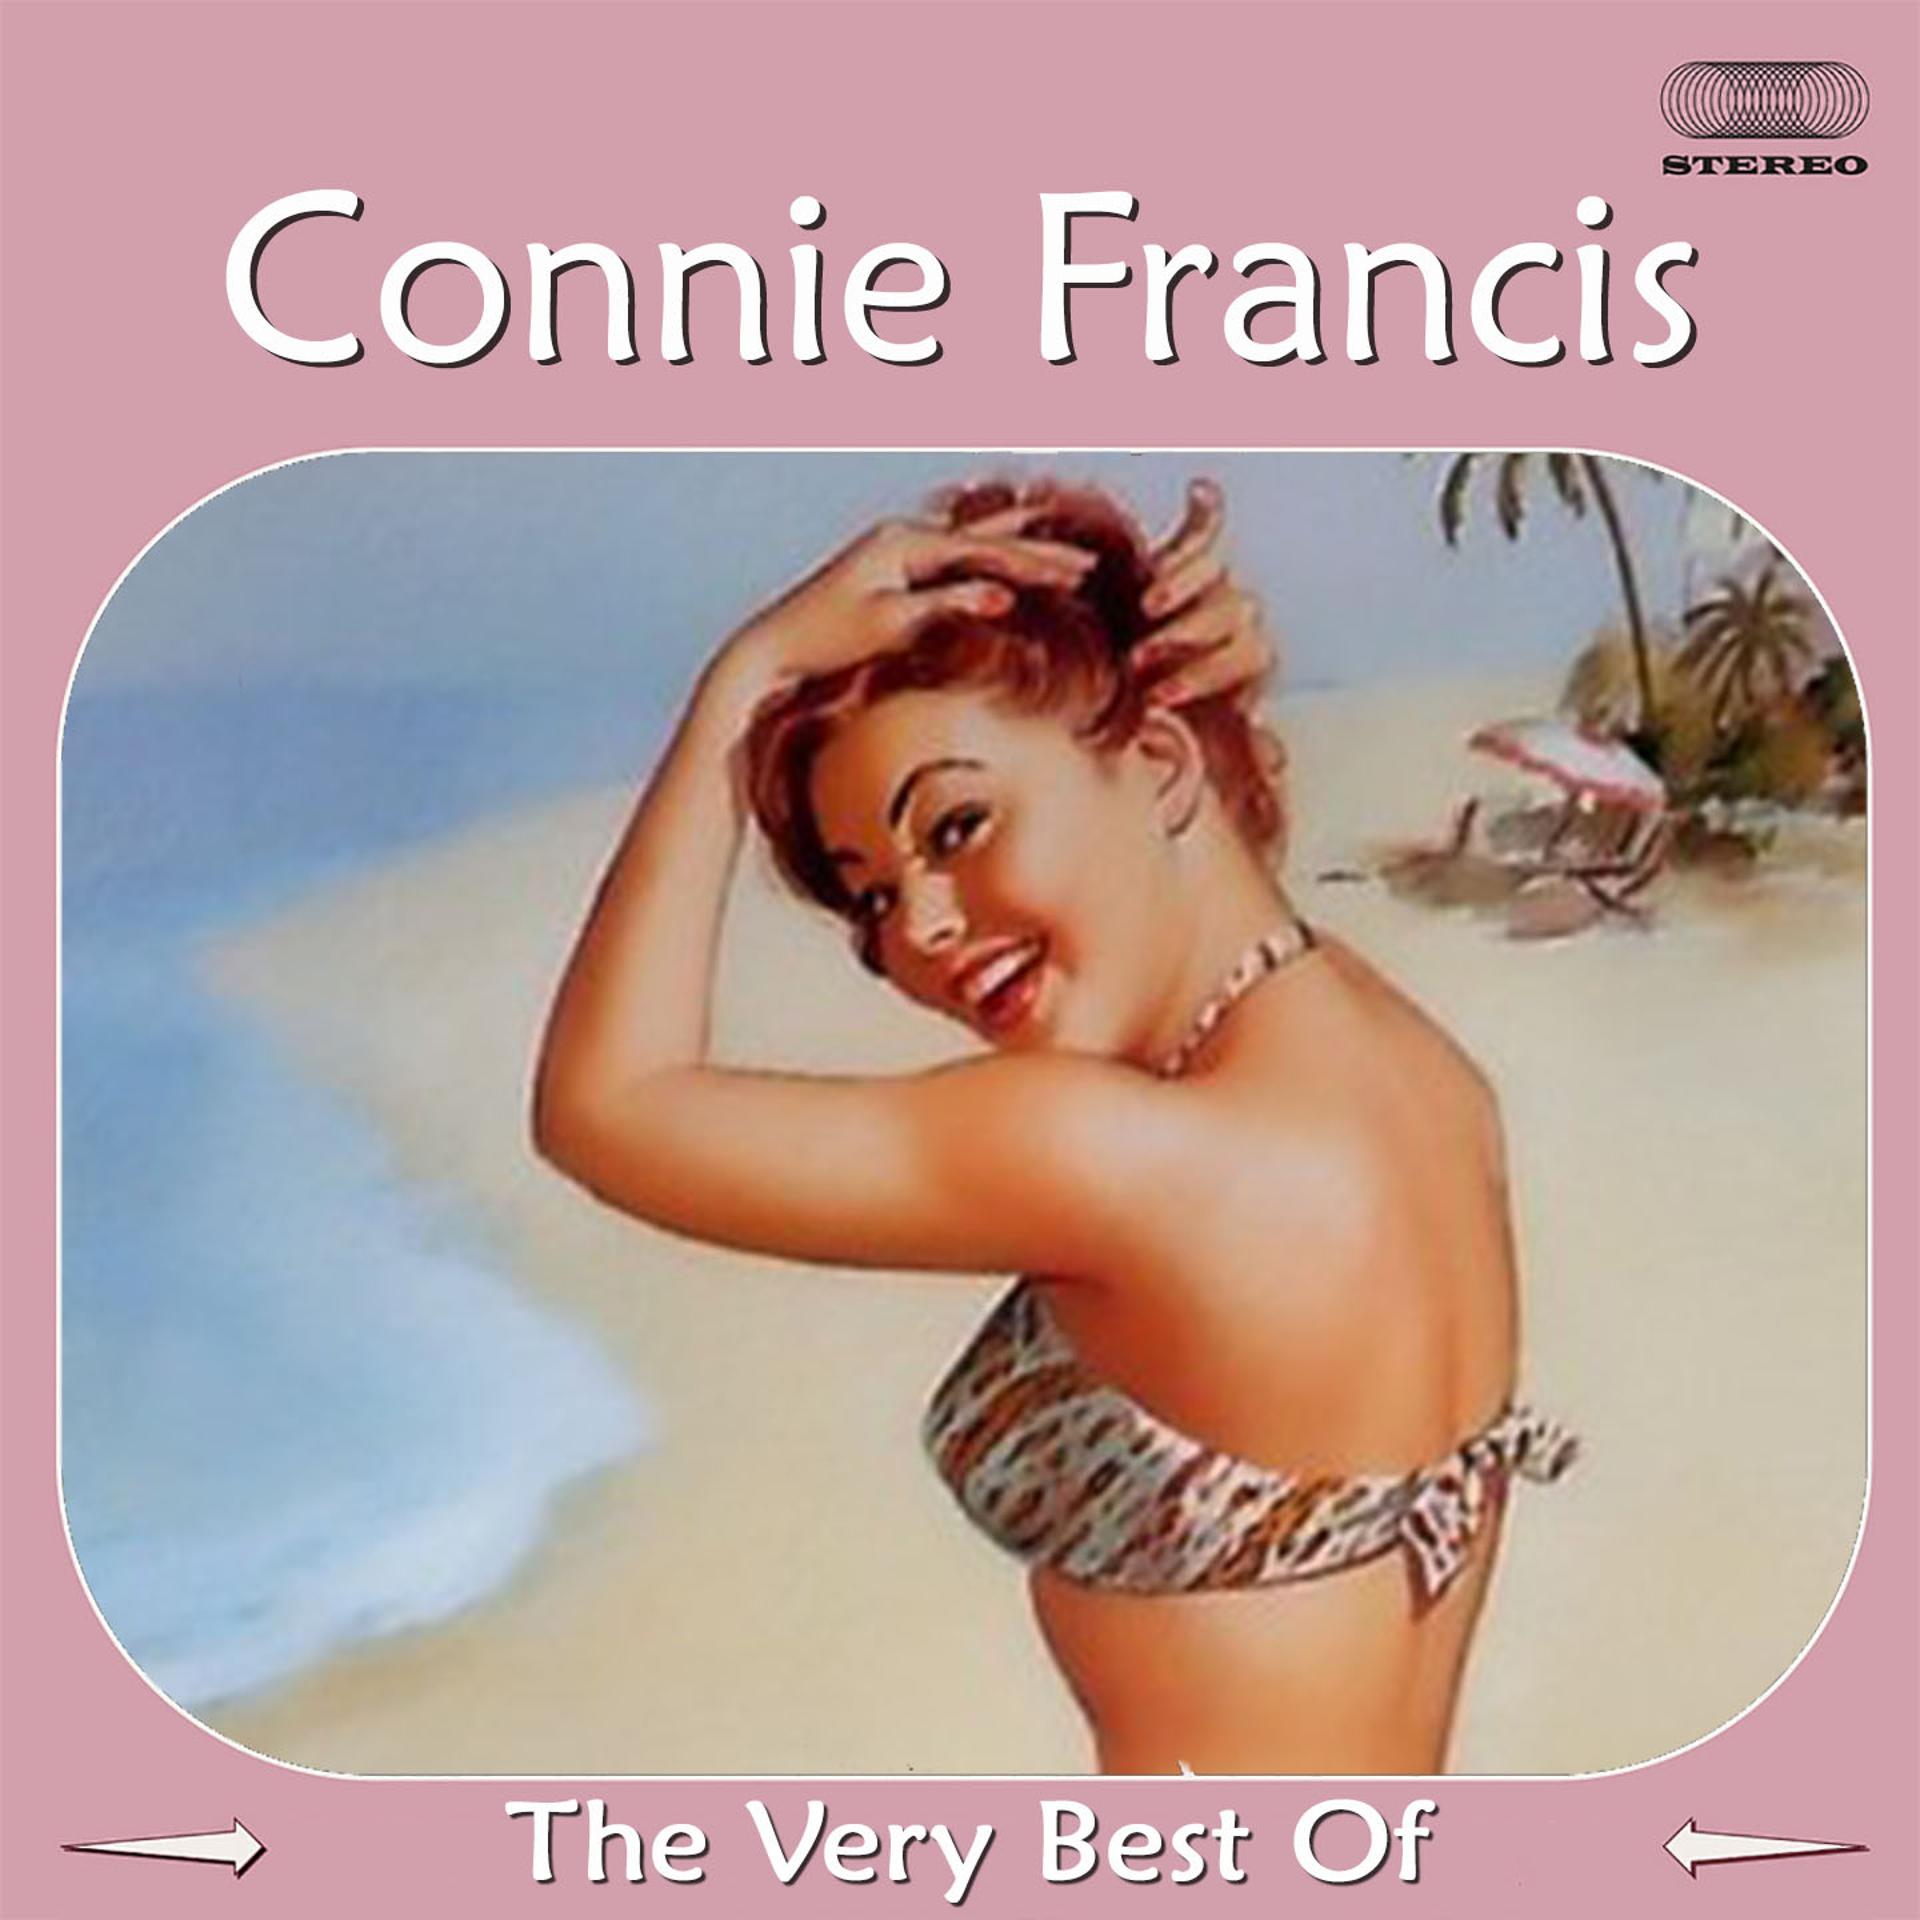 Постер альбома Stupid Cupid / Who's Sorry Now / Fallin' / I'm Sorry I Made You Cry / My Happiness / Lipstick on Your Collar / If I Didn't Care / My Heart Has a Mind of Its Own / Breakin' in a Brand New Broken Heart (The Very Best of Connie Francis)